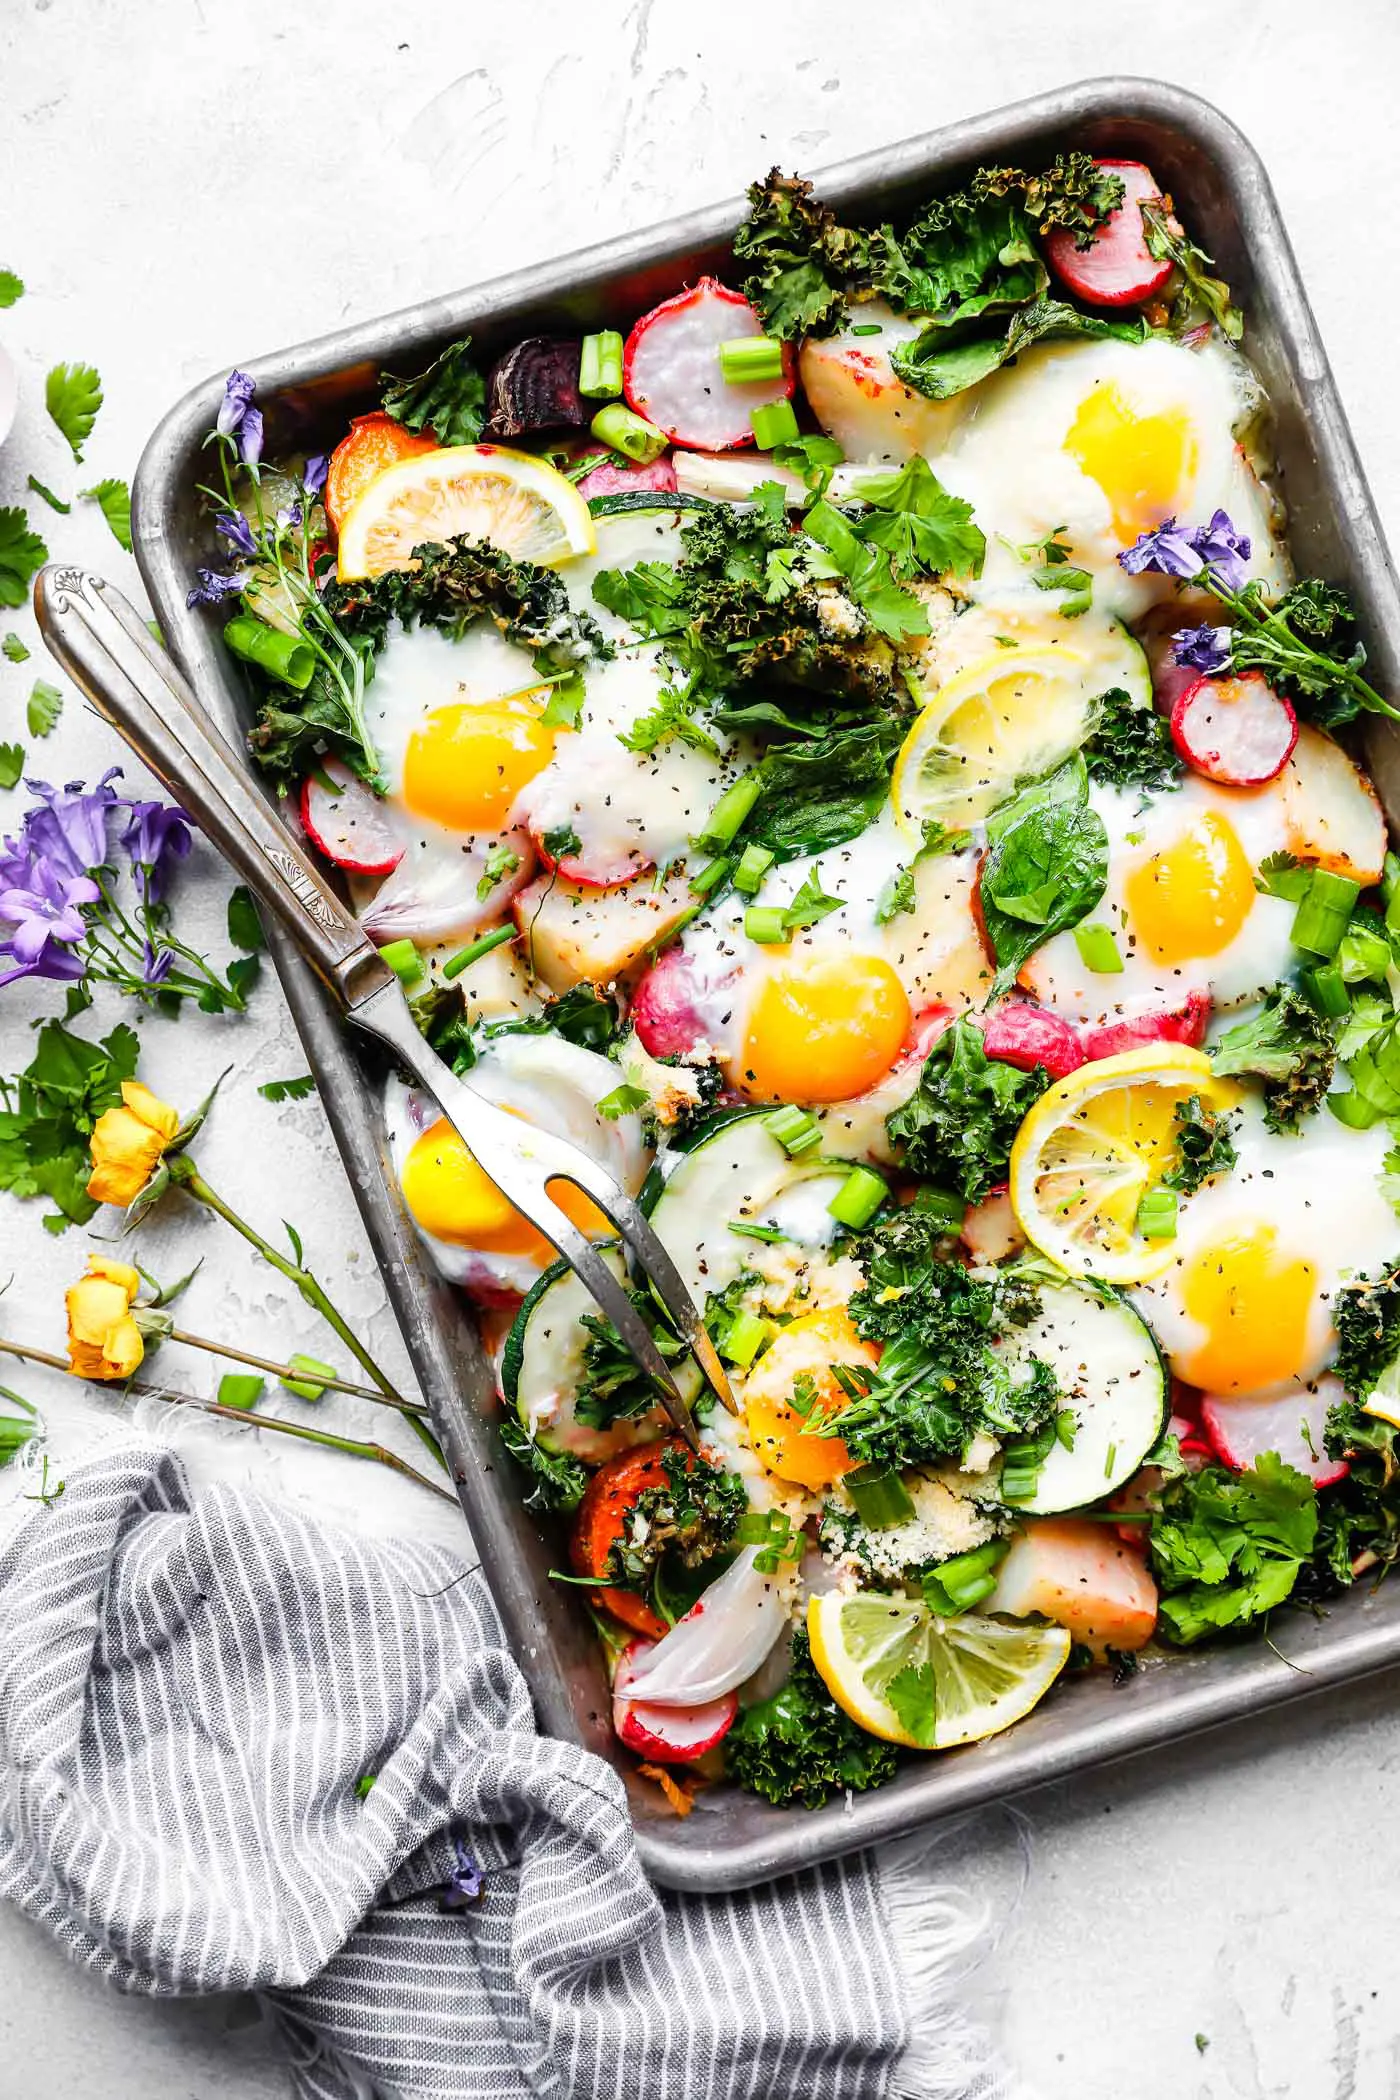 Baked Eggs and Vegetables